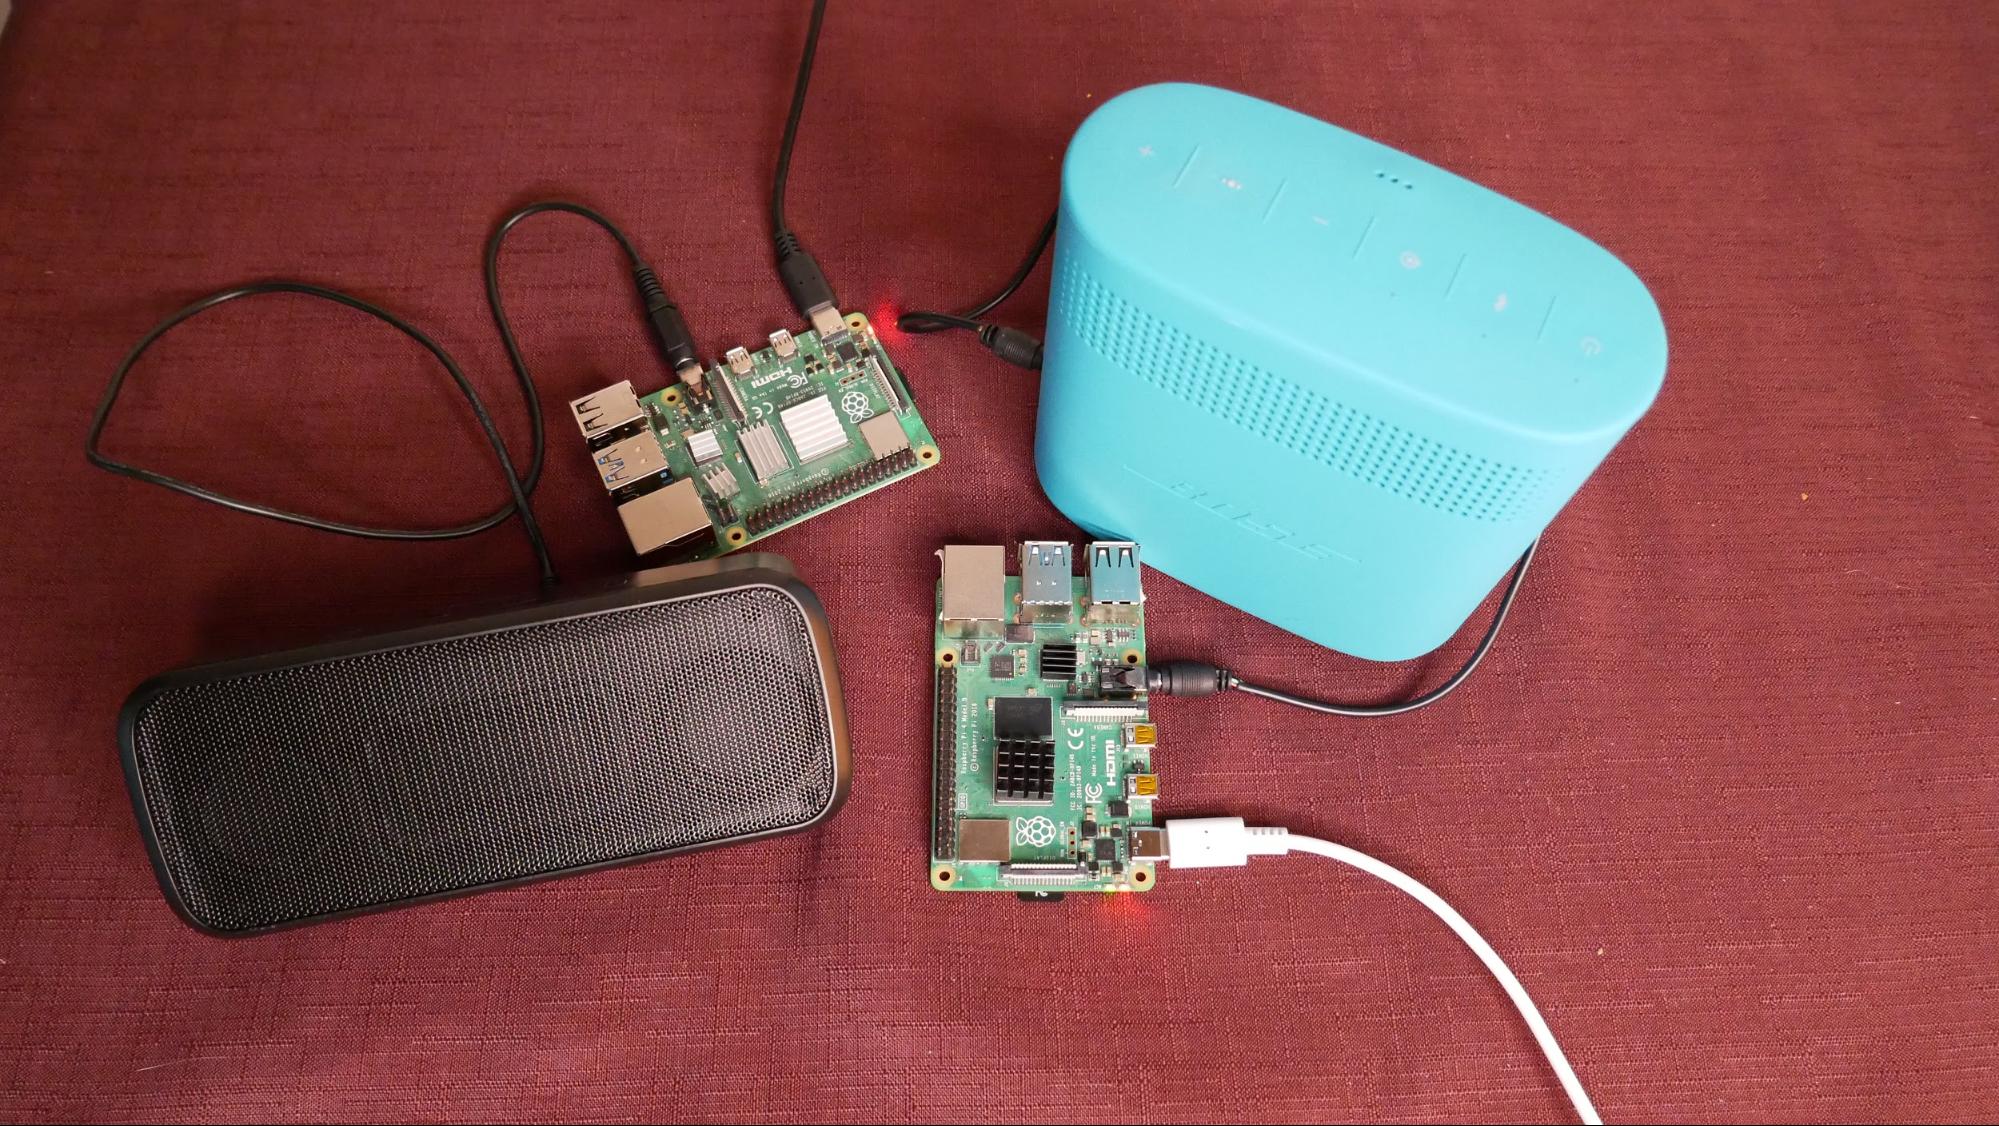 Aanpassingsvermogen Gering Meyella How to Build a Raspberry Pi-Powered Multi-Room Audio System | Tom's Hardware